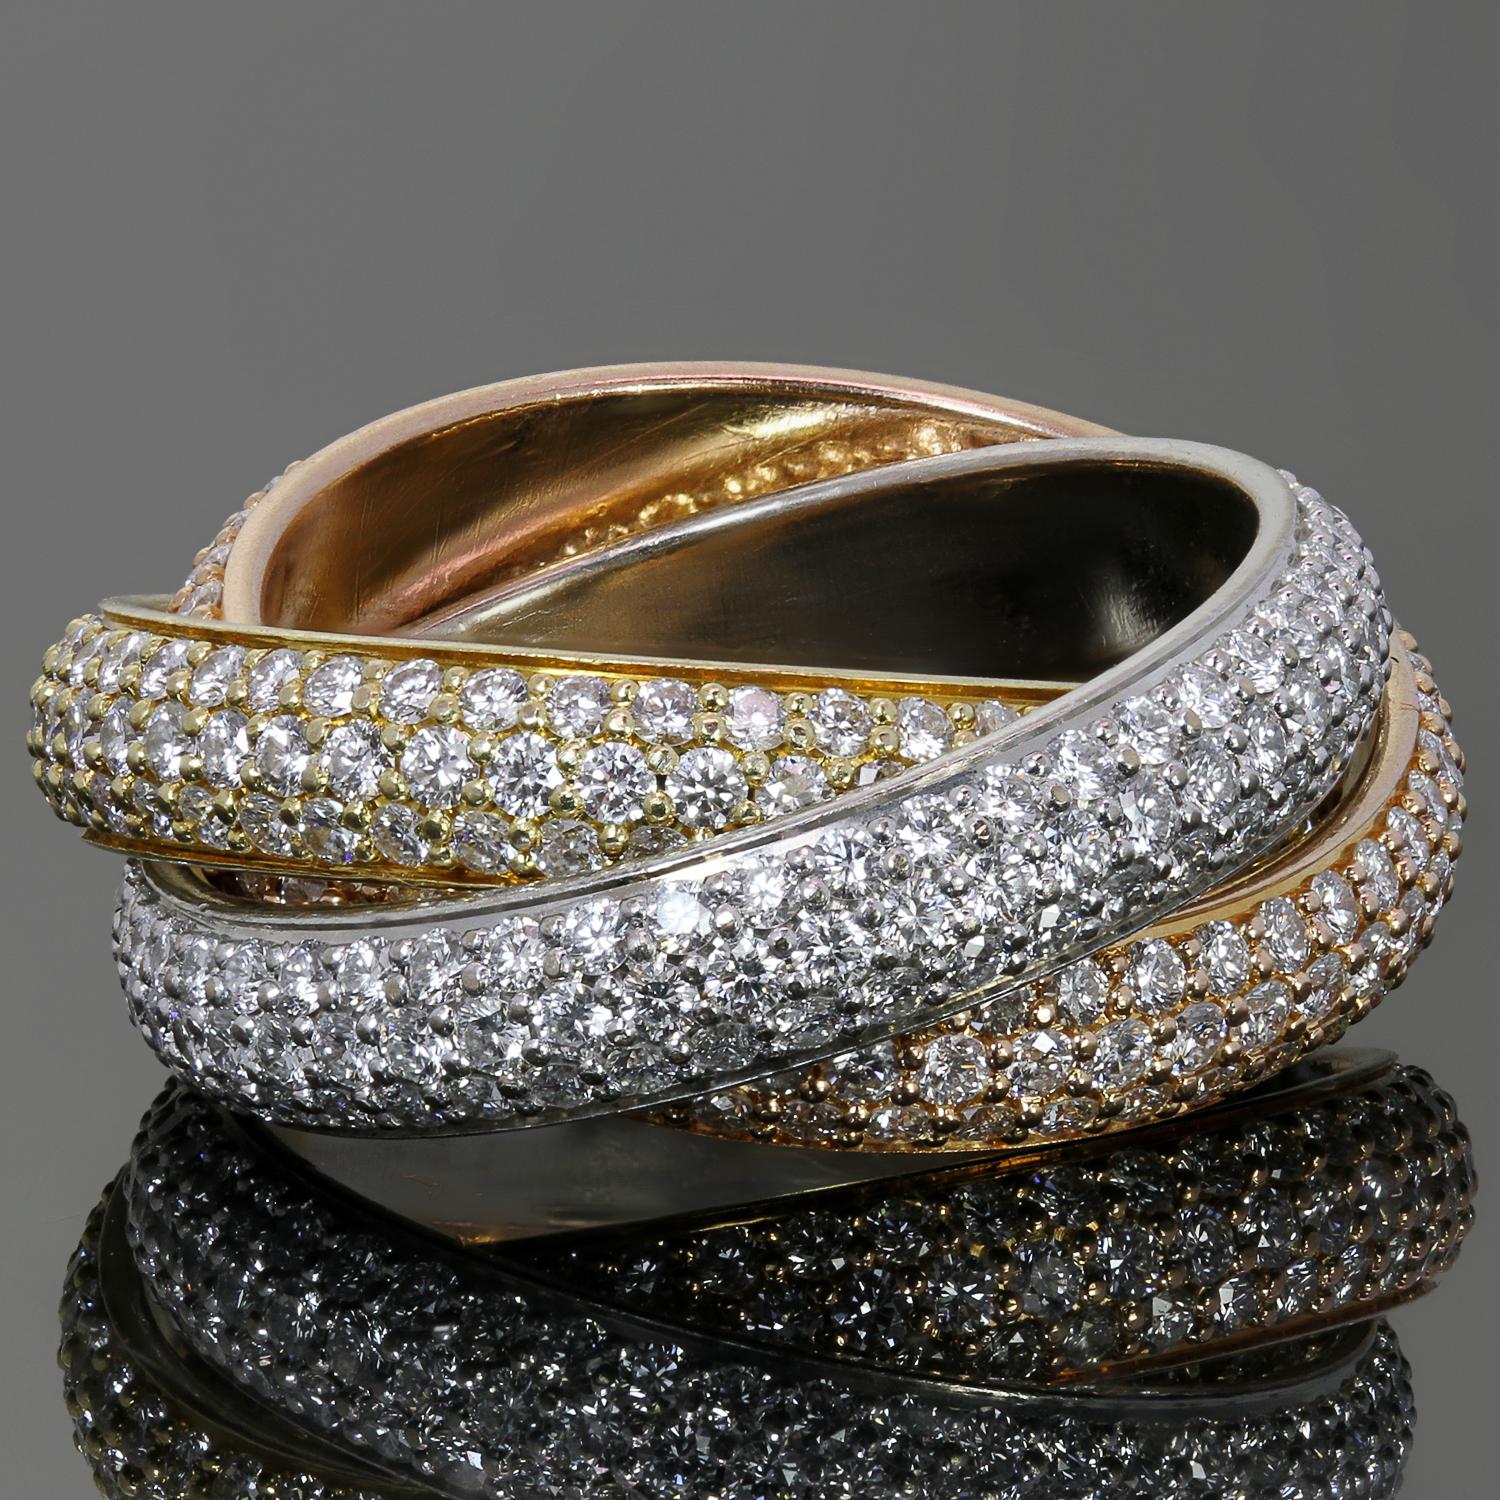 This iconic ring from Cartier's Trinity collection features 3 interconnected bands crafted in 18k yellow, white and rose gold and pave-set with brilliant-cut round F-G VVS2-VS1 diamonds weighing an estimated 2.95 carats. Made in France circa 2000s.